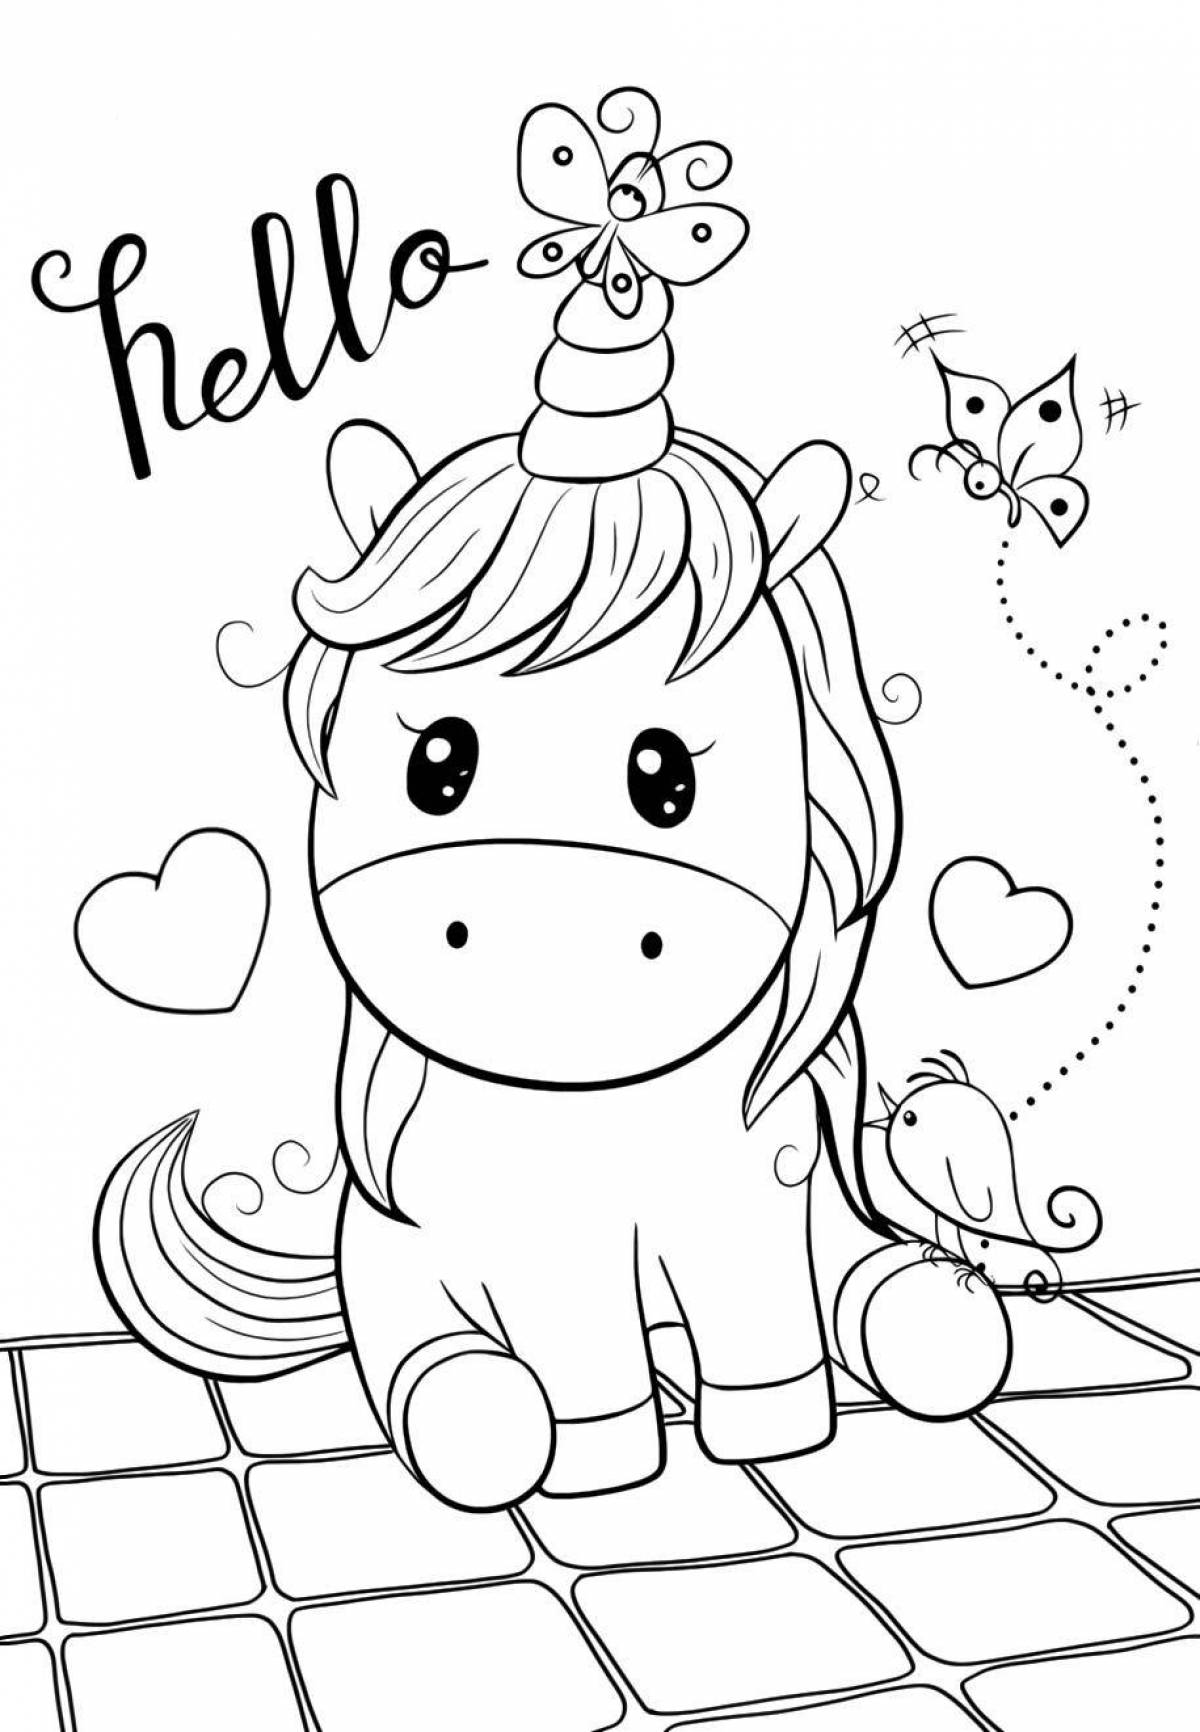 Amazing coloring pages for girls cute unicorns